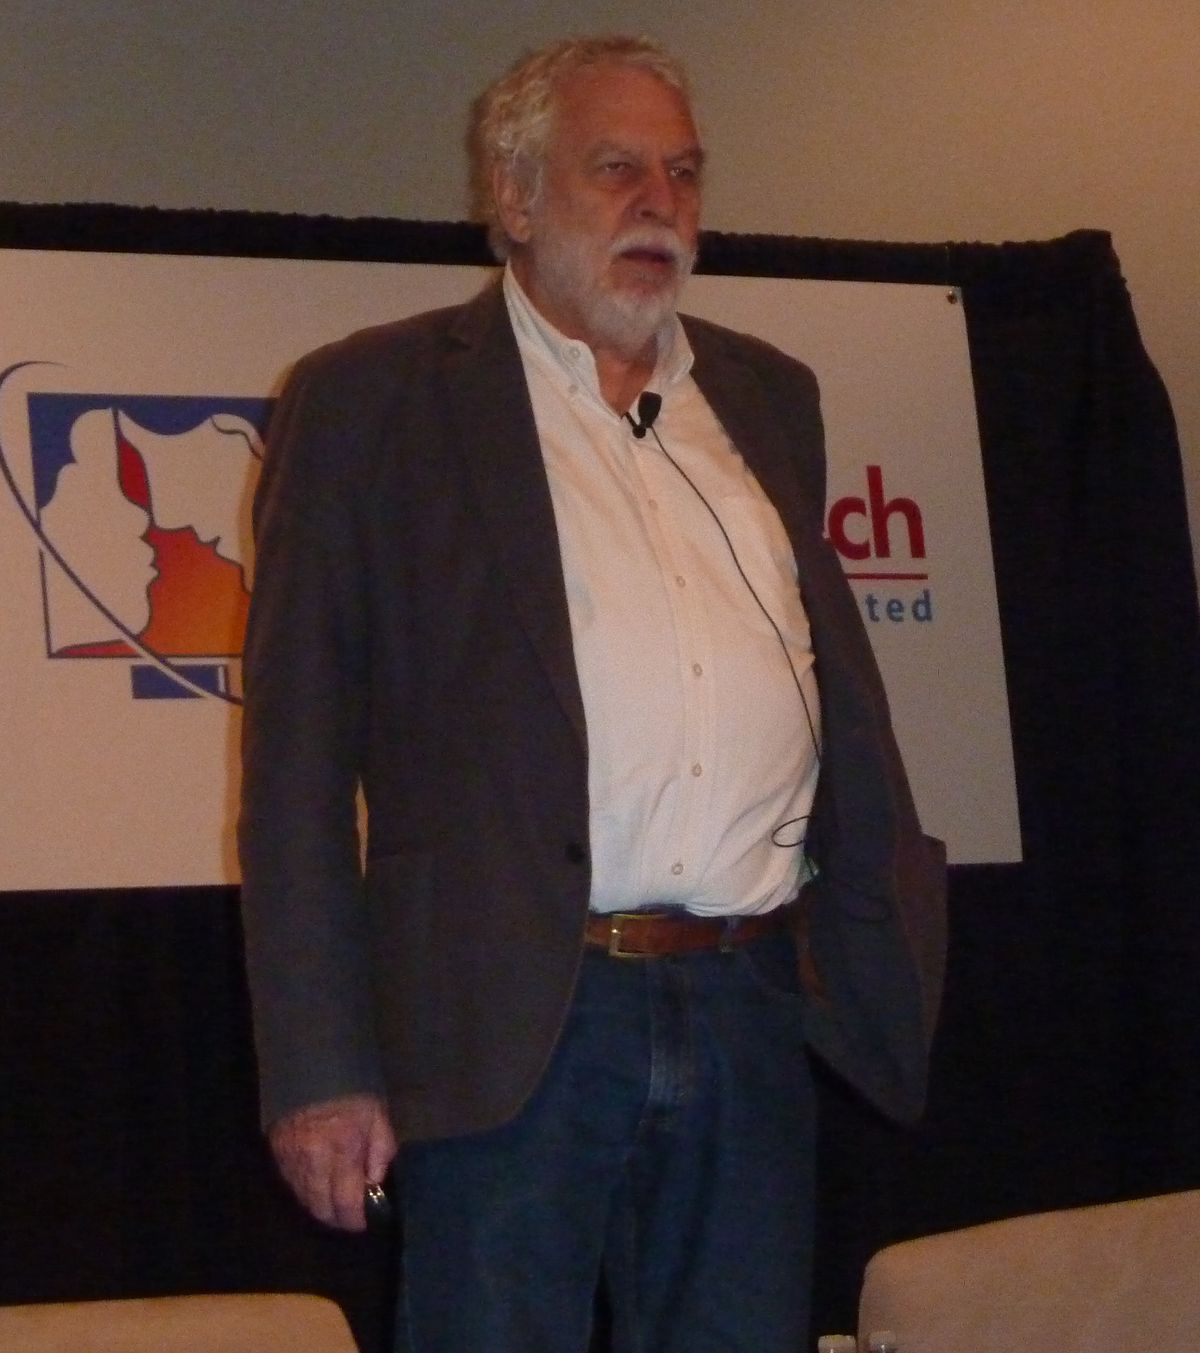 CES 2013: Atari Founder Plans to Make Education As Addictive As Video Games